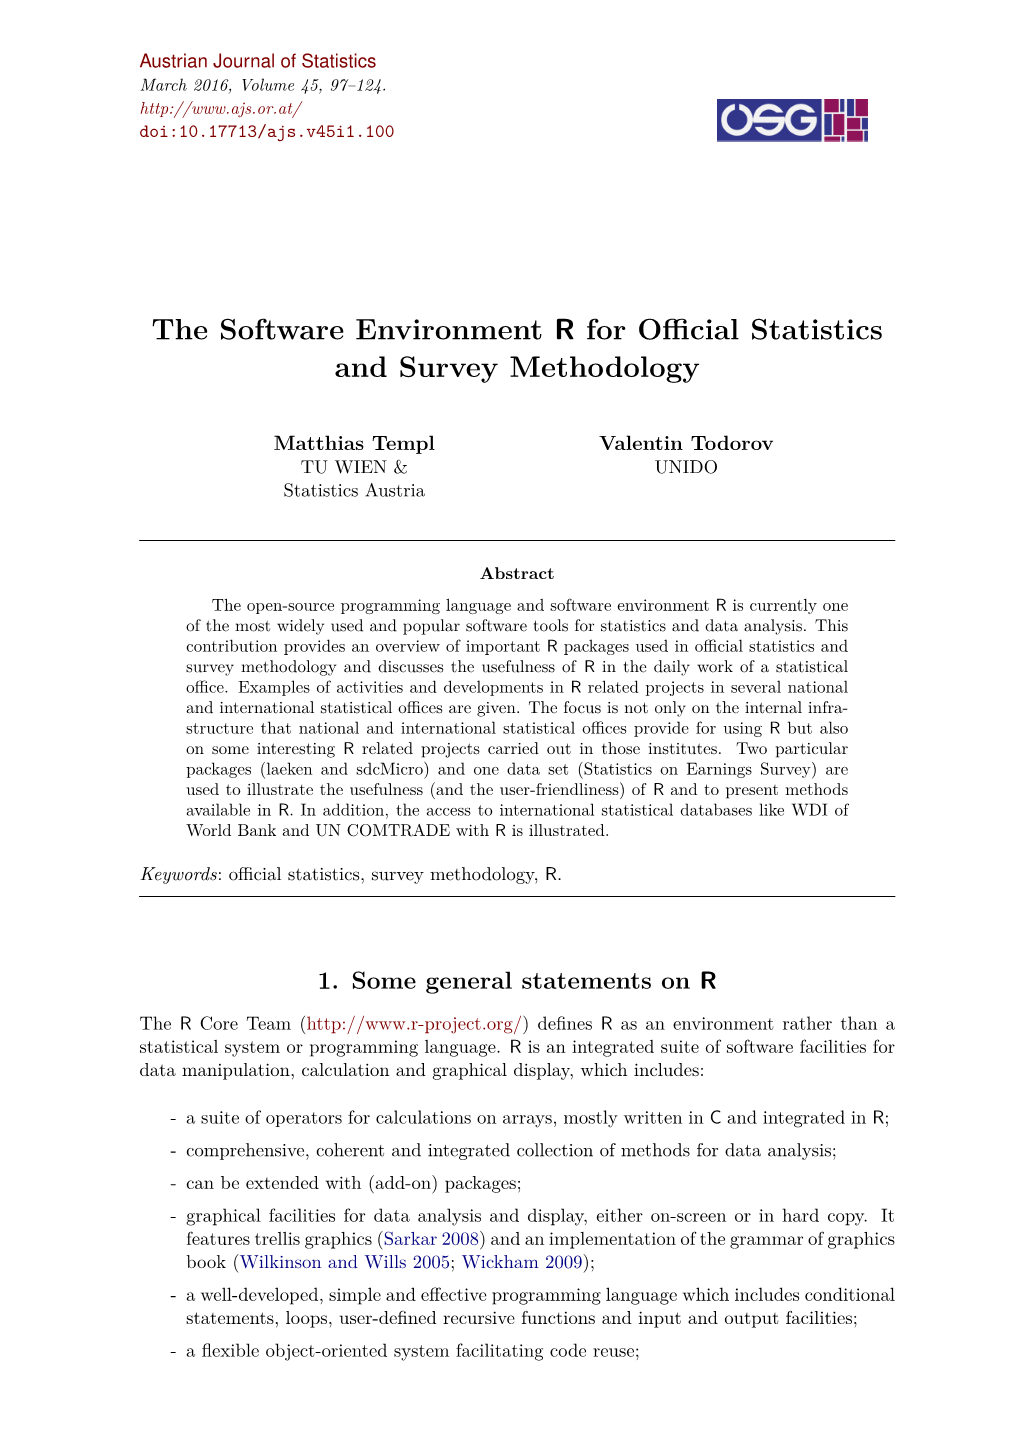 The Software Environment R for Official Statistics and Survey